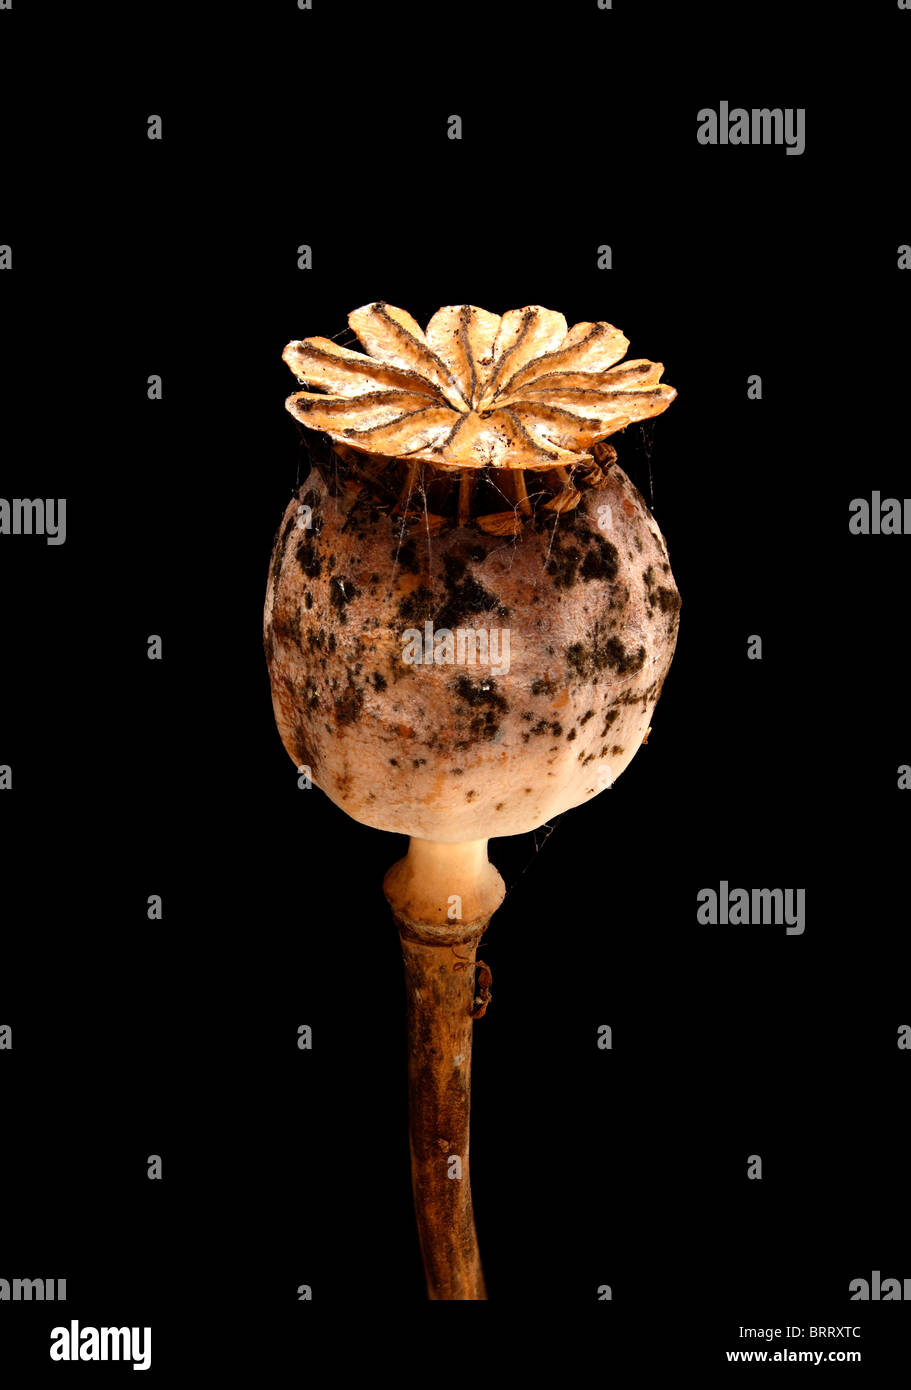 Close-up of old dried poppy seed head with mildew spot patterning against a dark black background Stock Photo